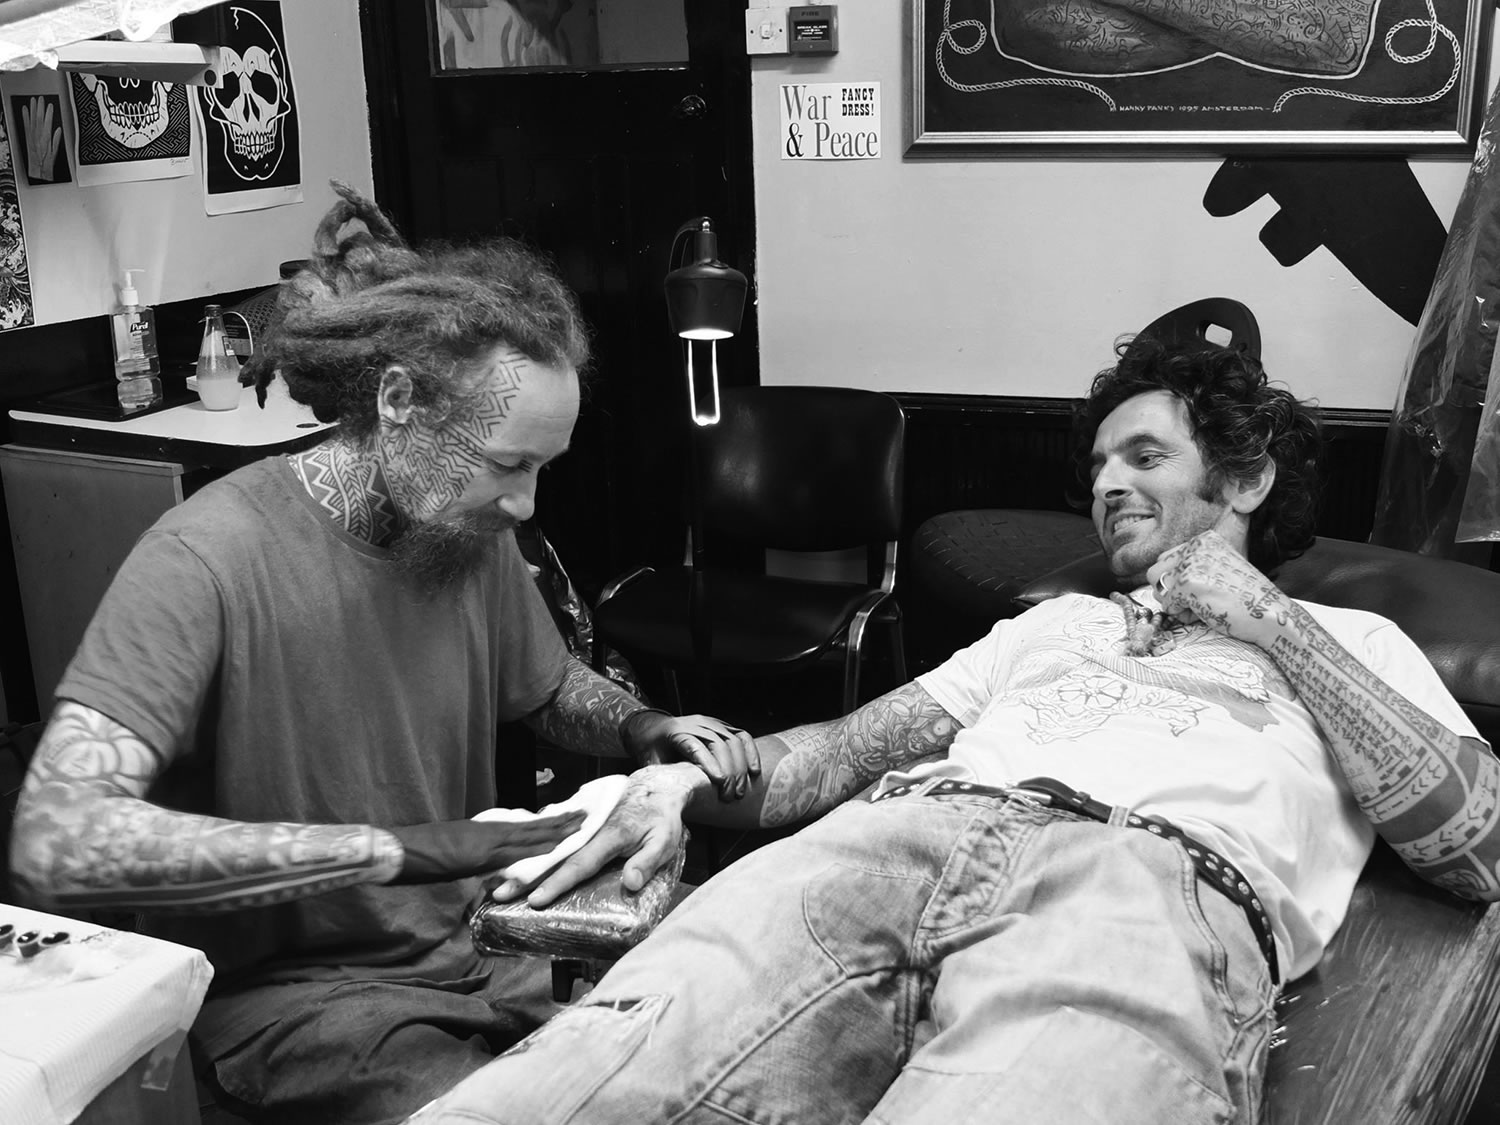 artist tomas tomas tattooing client